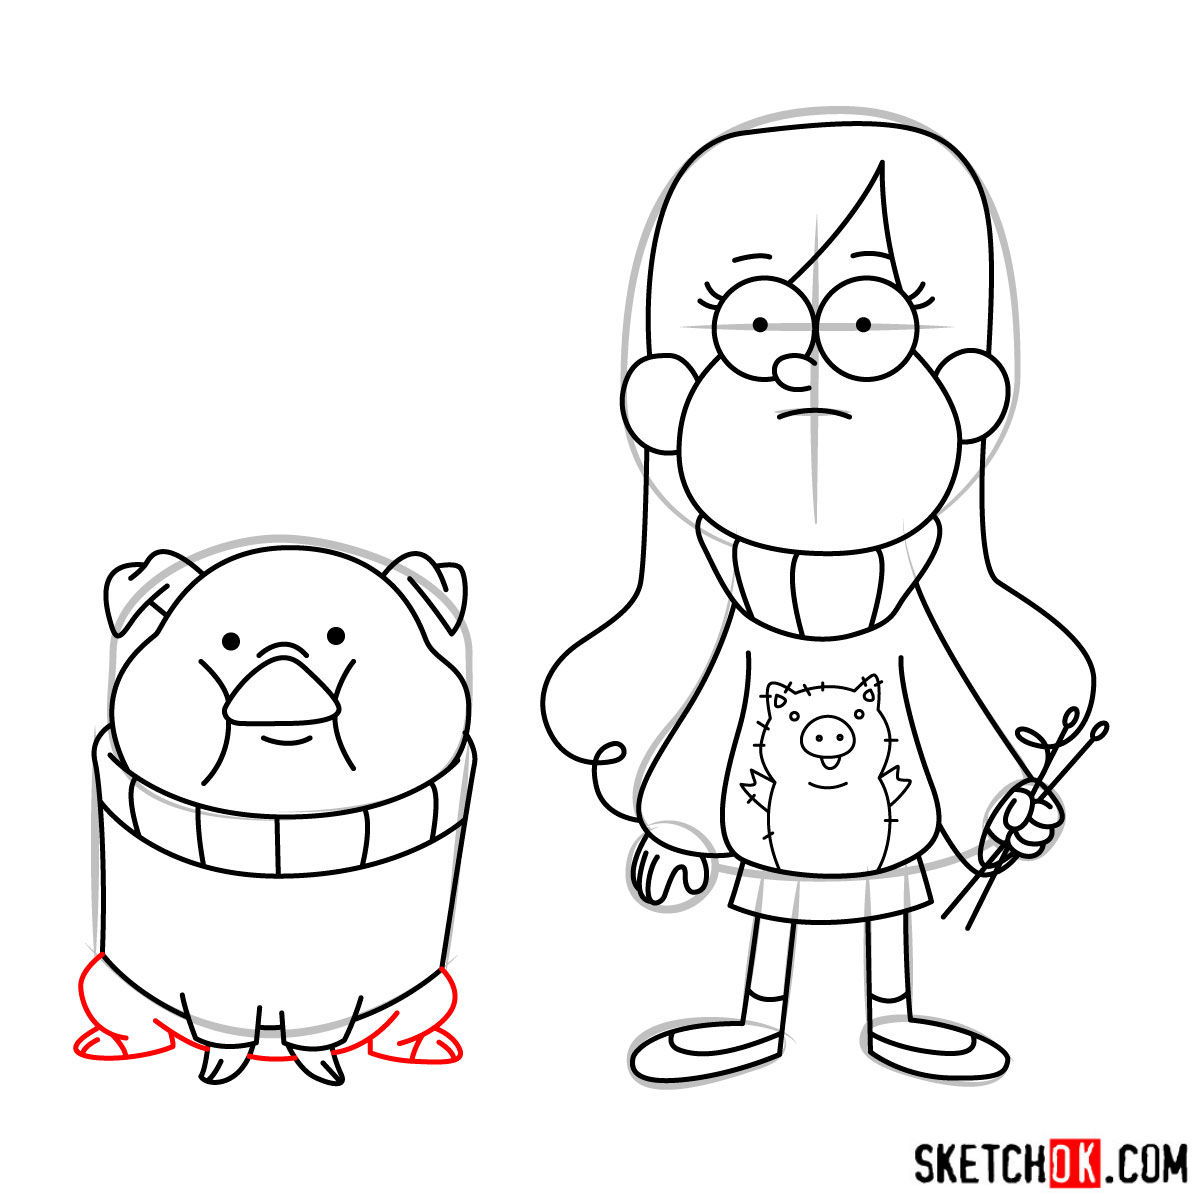 How to draw Mabel Pines with Pig - step 16